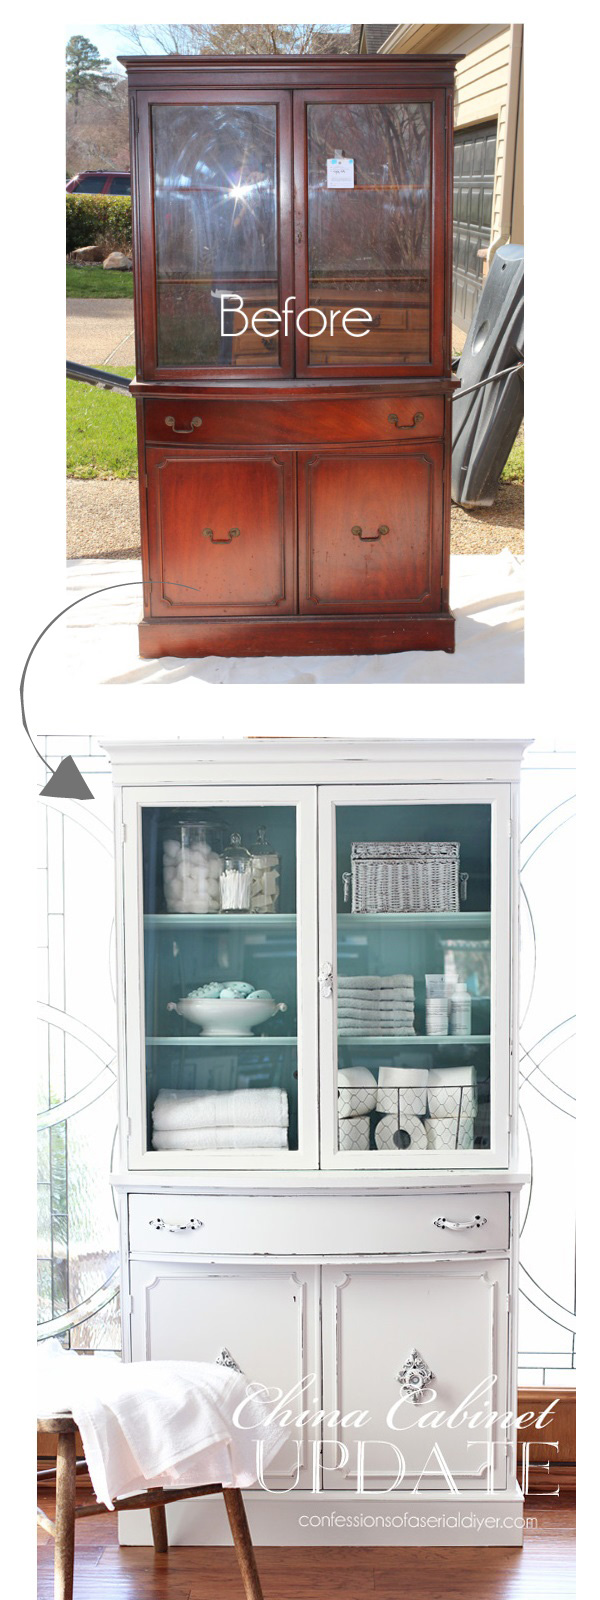 China Cabinet Update in Bit of Sugar by Behr from confessionsofaserialDIYer.com